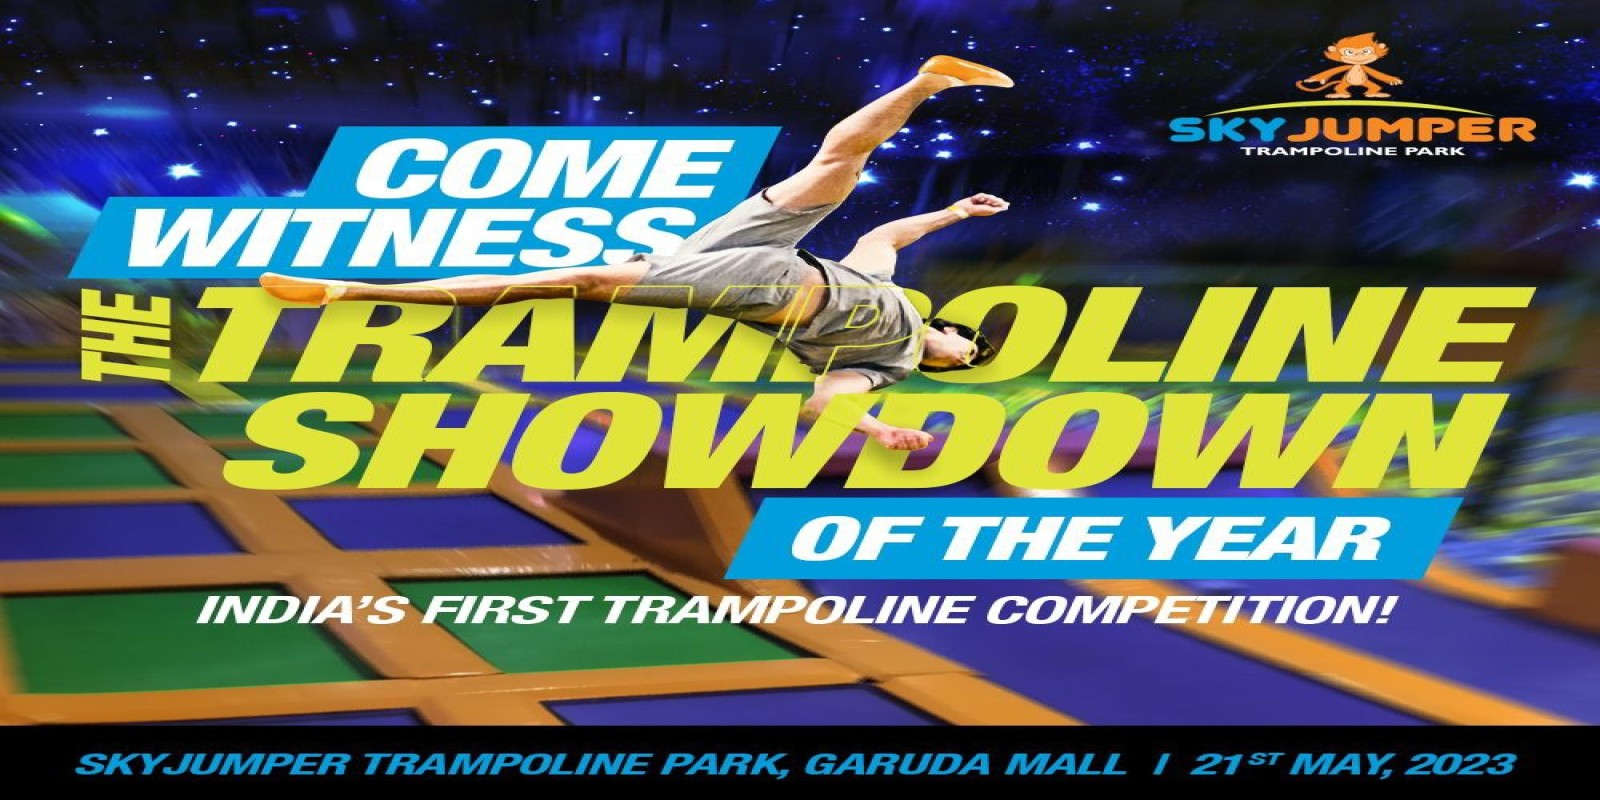 SkyJumper Trampoline Park Proudly Announces India’s First Open Trampoline Competition